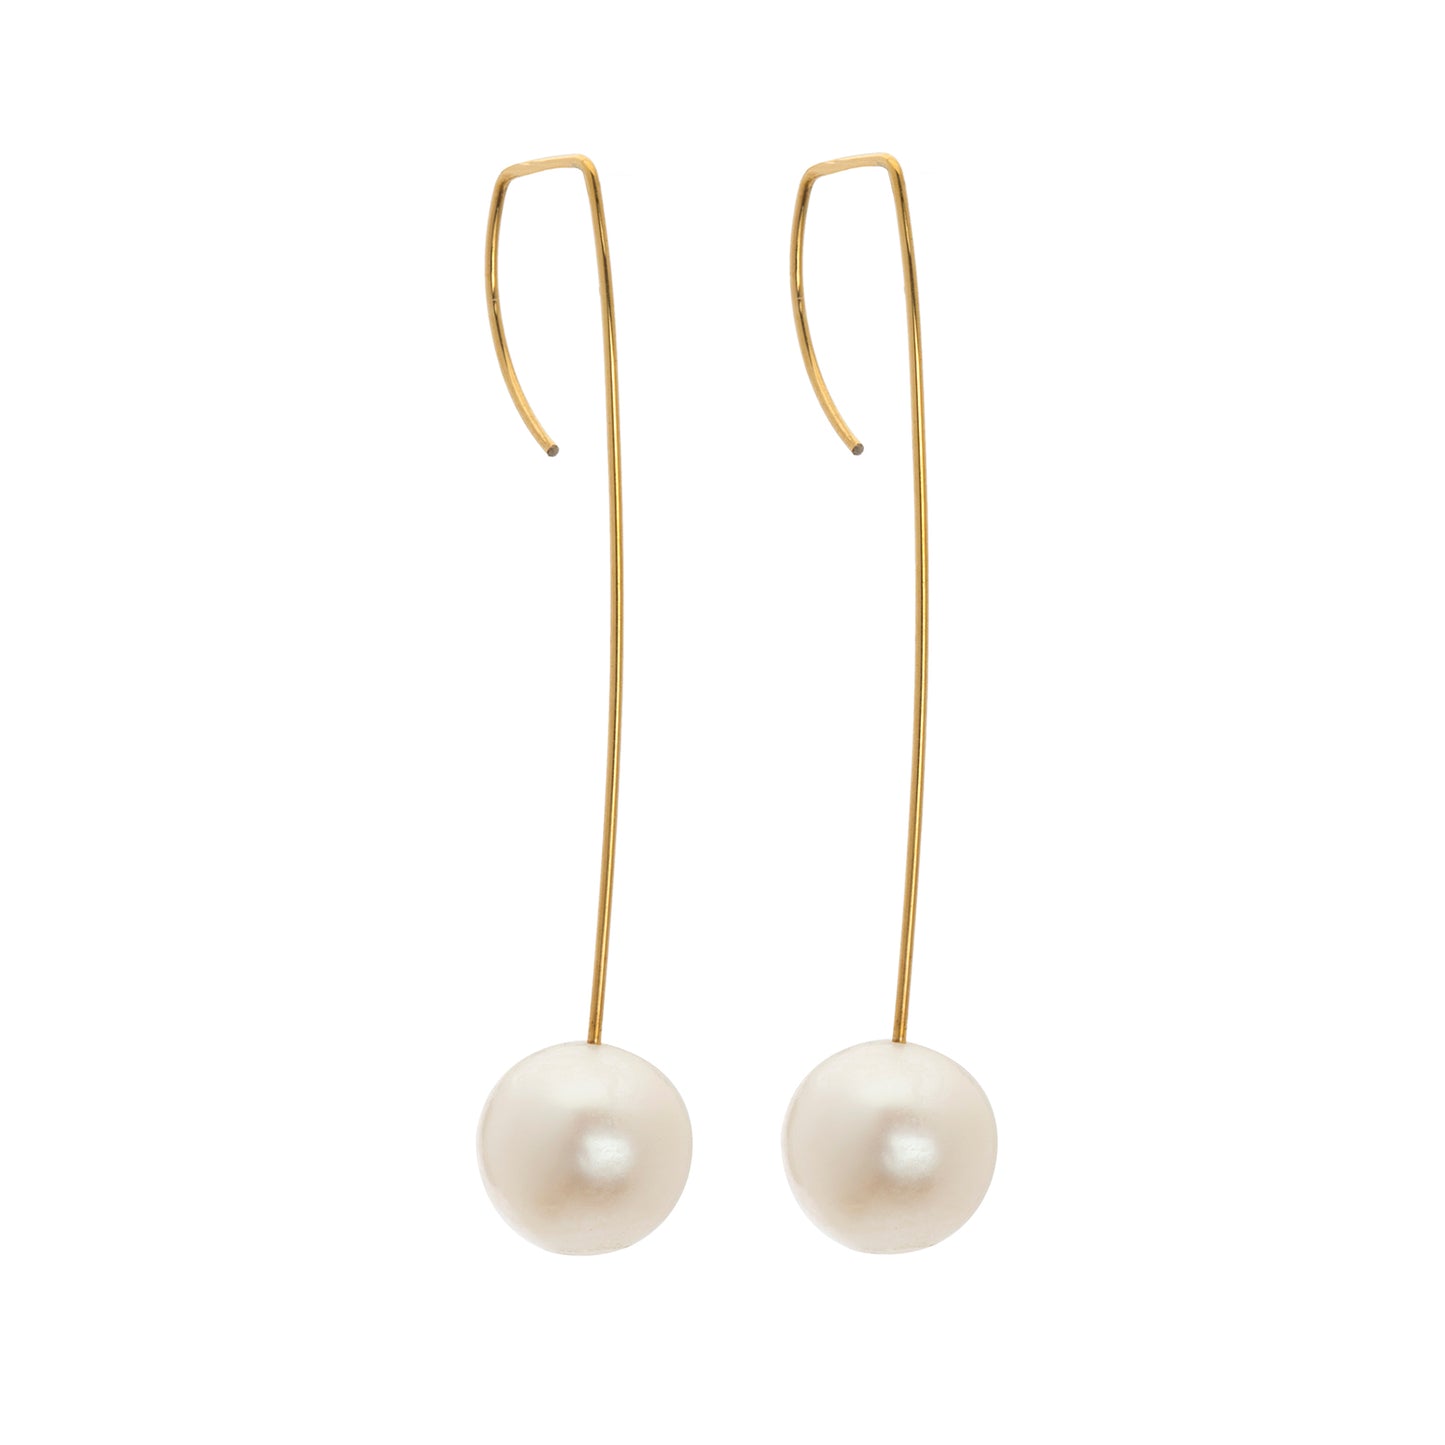 Long Straight Drop Earrings with Round Freshwater Pearls